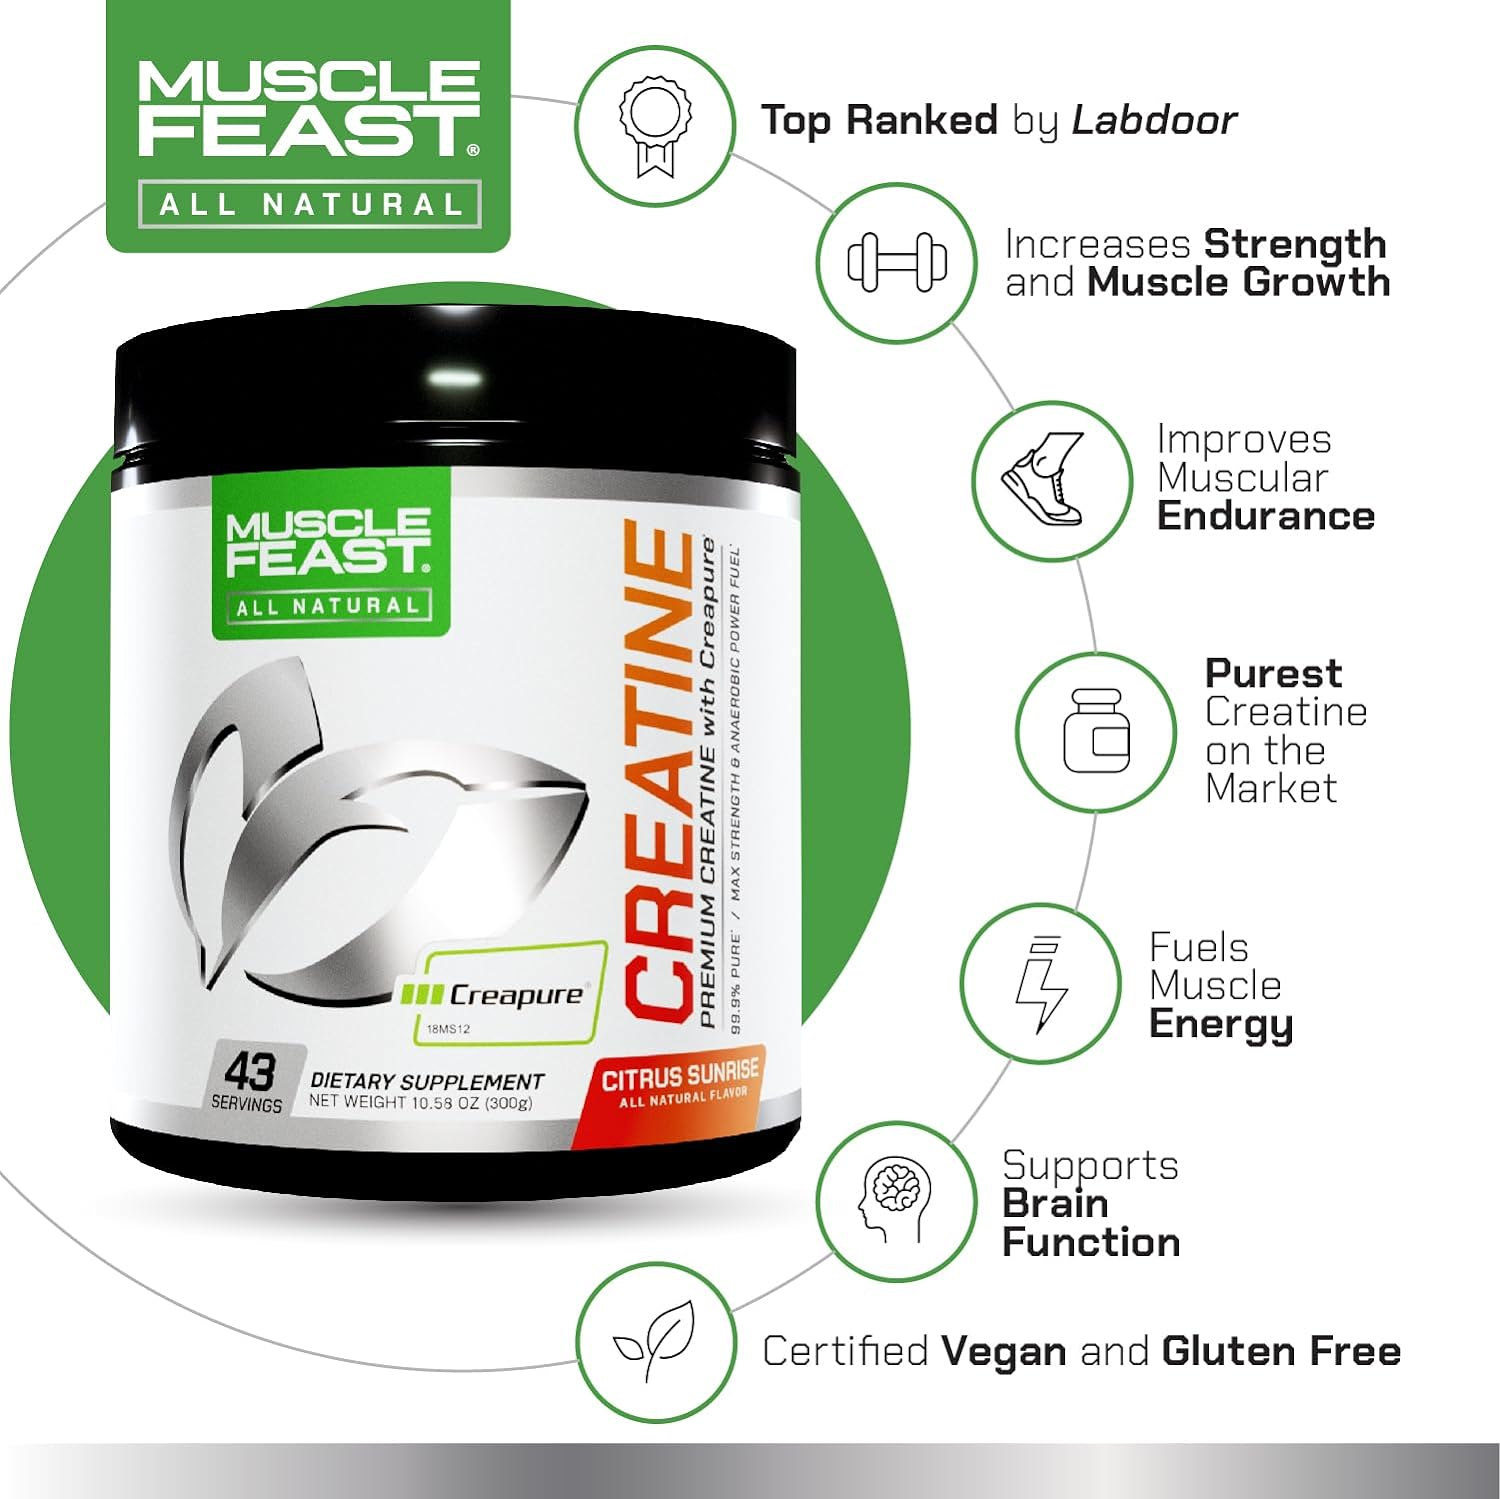 MUSCLE FEAST Creapure Creatine Monohydrate Powder | Premium Pre-Workout or Post-Workout | Easy to Mix, Gluten-Free, Safe and Pure, Kosher Certified (2lb, Unflavored)